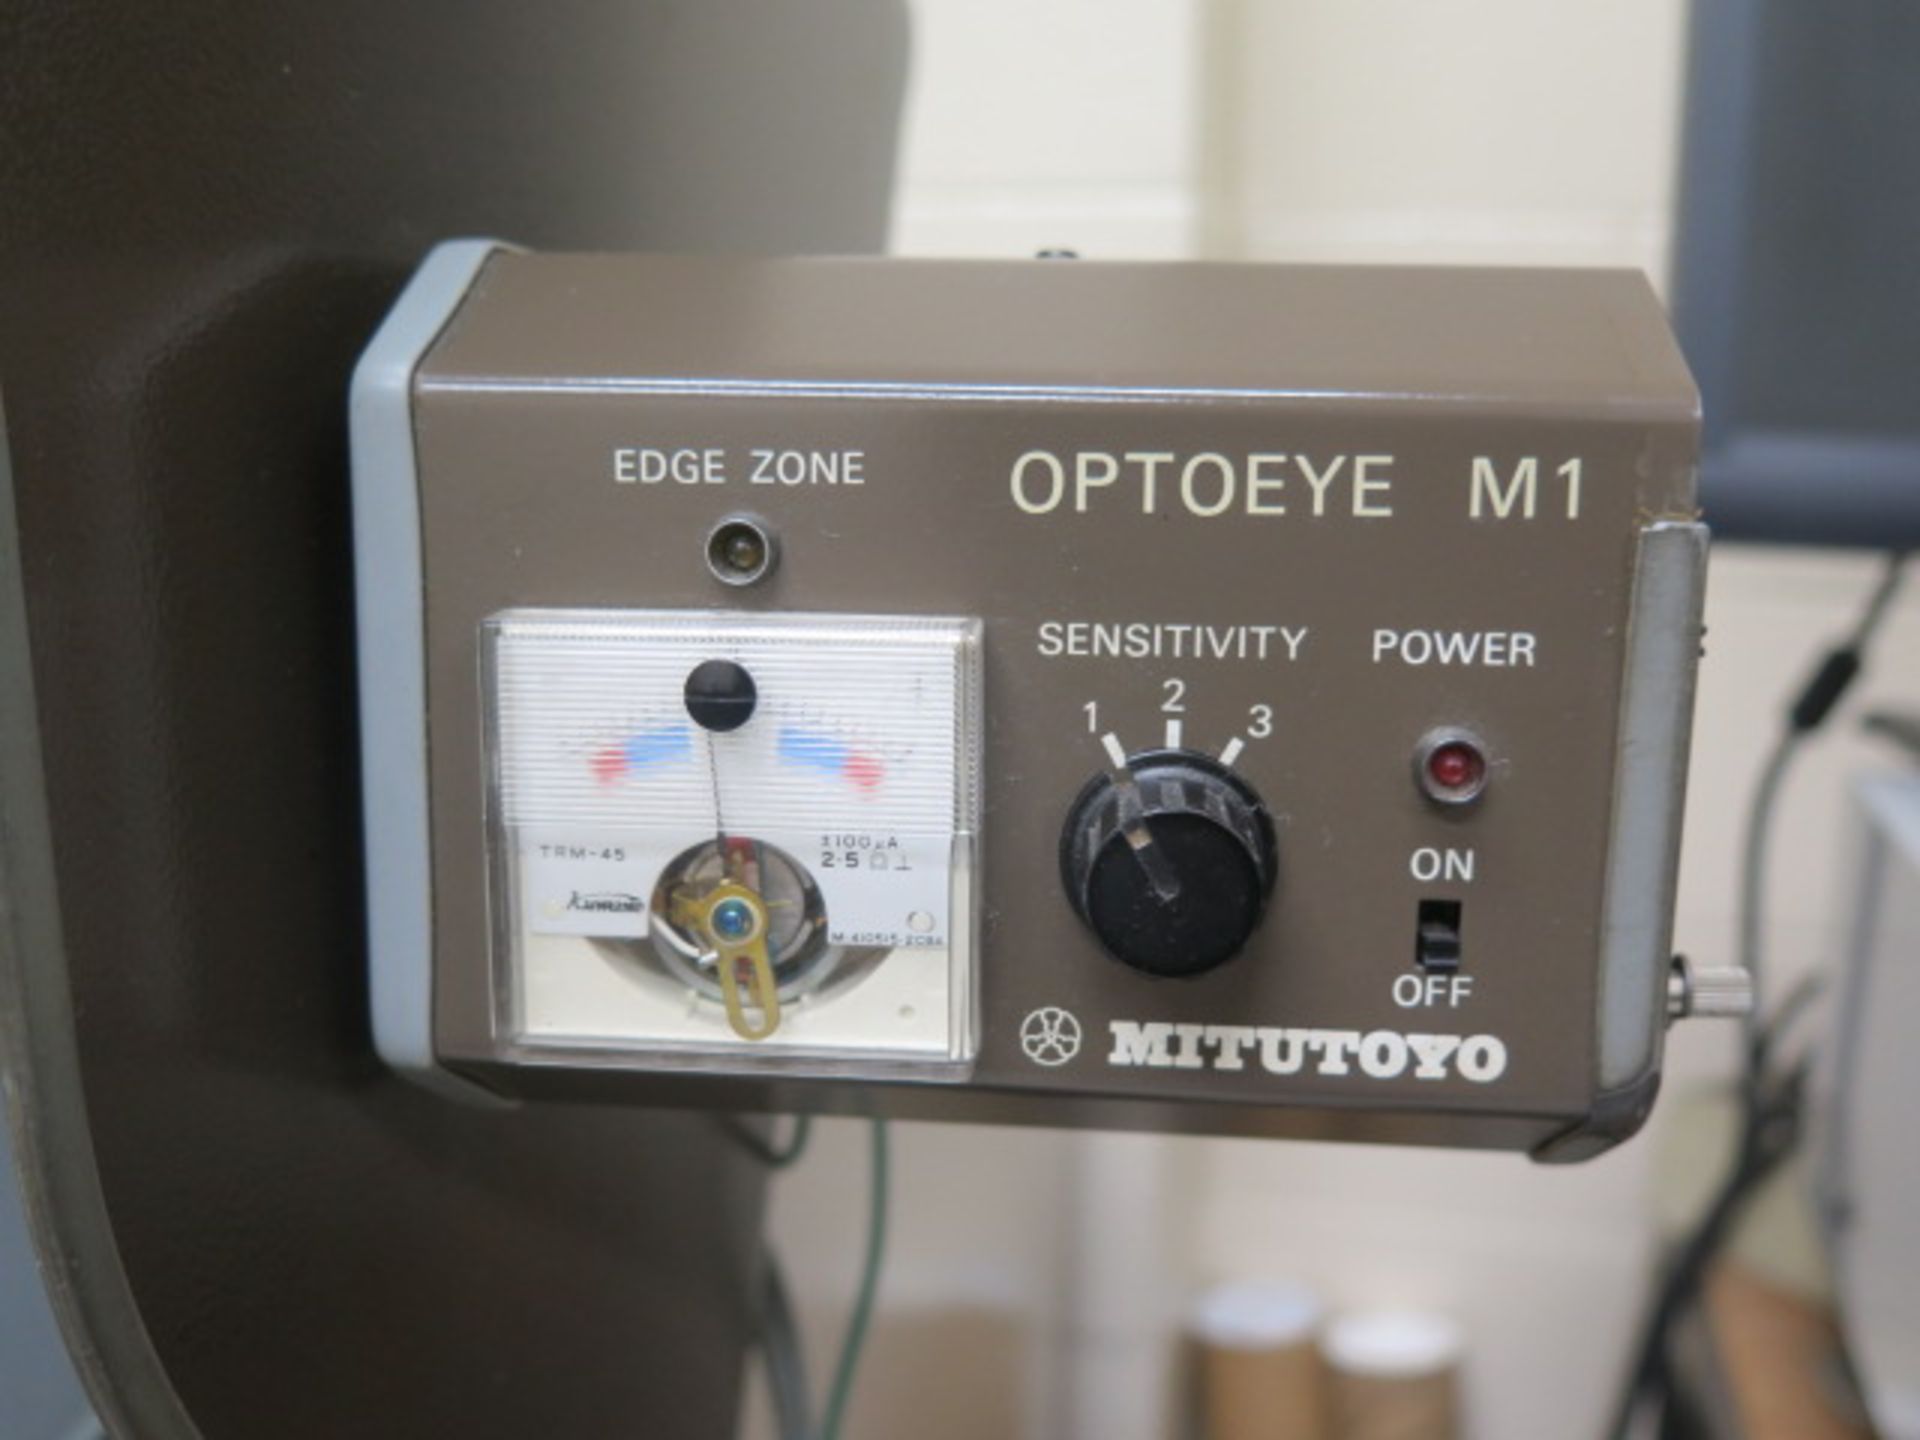 Mitutoyo PH-350 13” Optical Comparator s/n 60093 w/ Mitutoyo DRO, Mitutoyo M1 Edge Zone, SOLD AS IS - Image 10 of 18